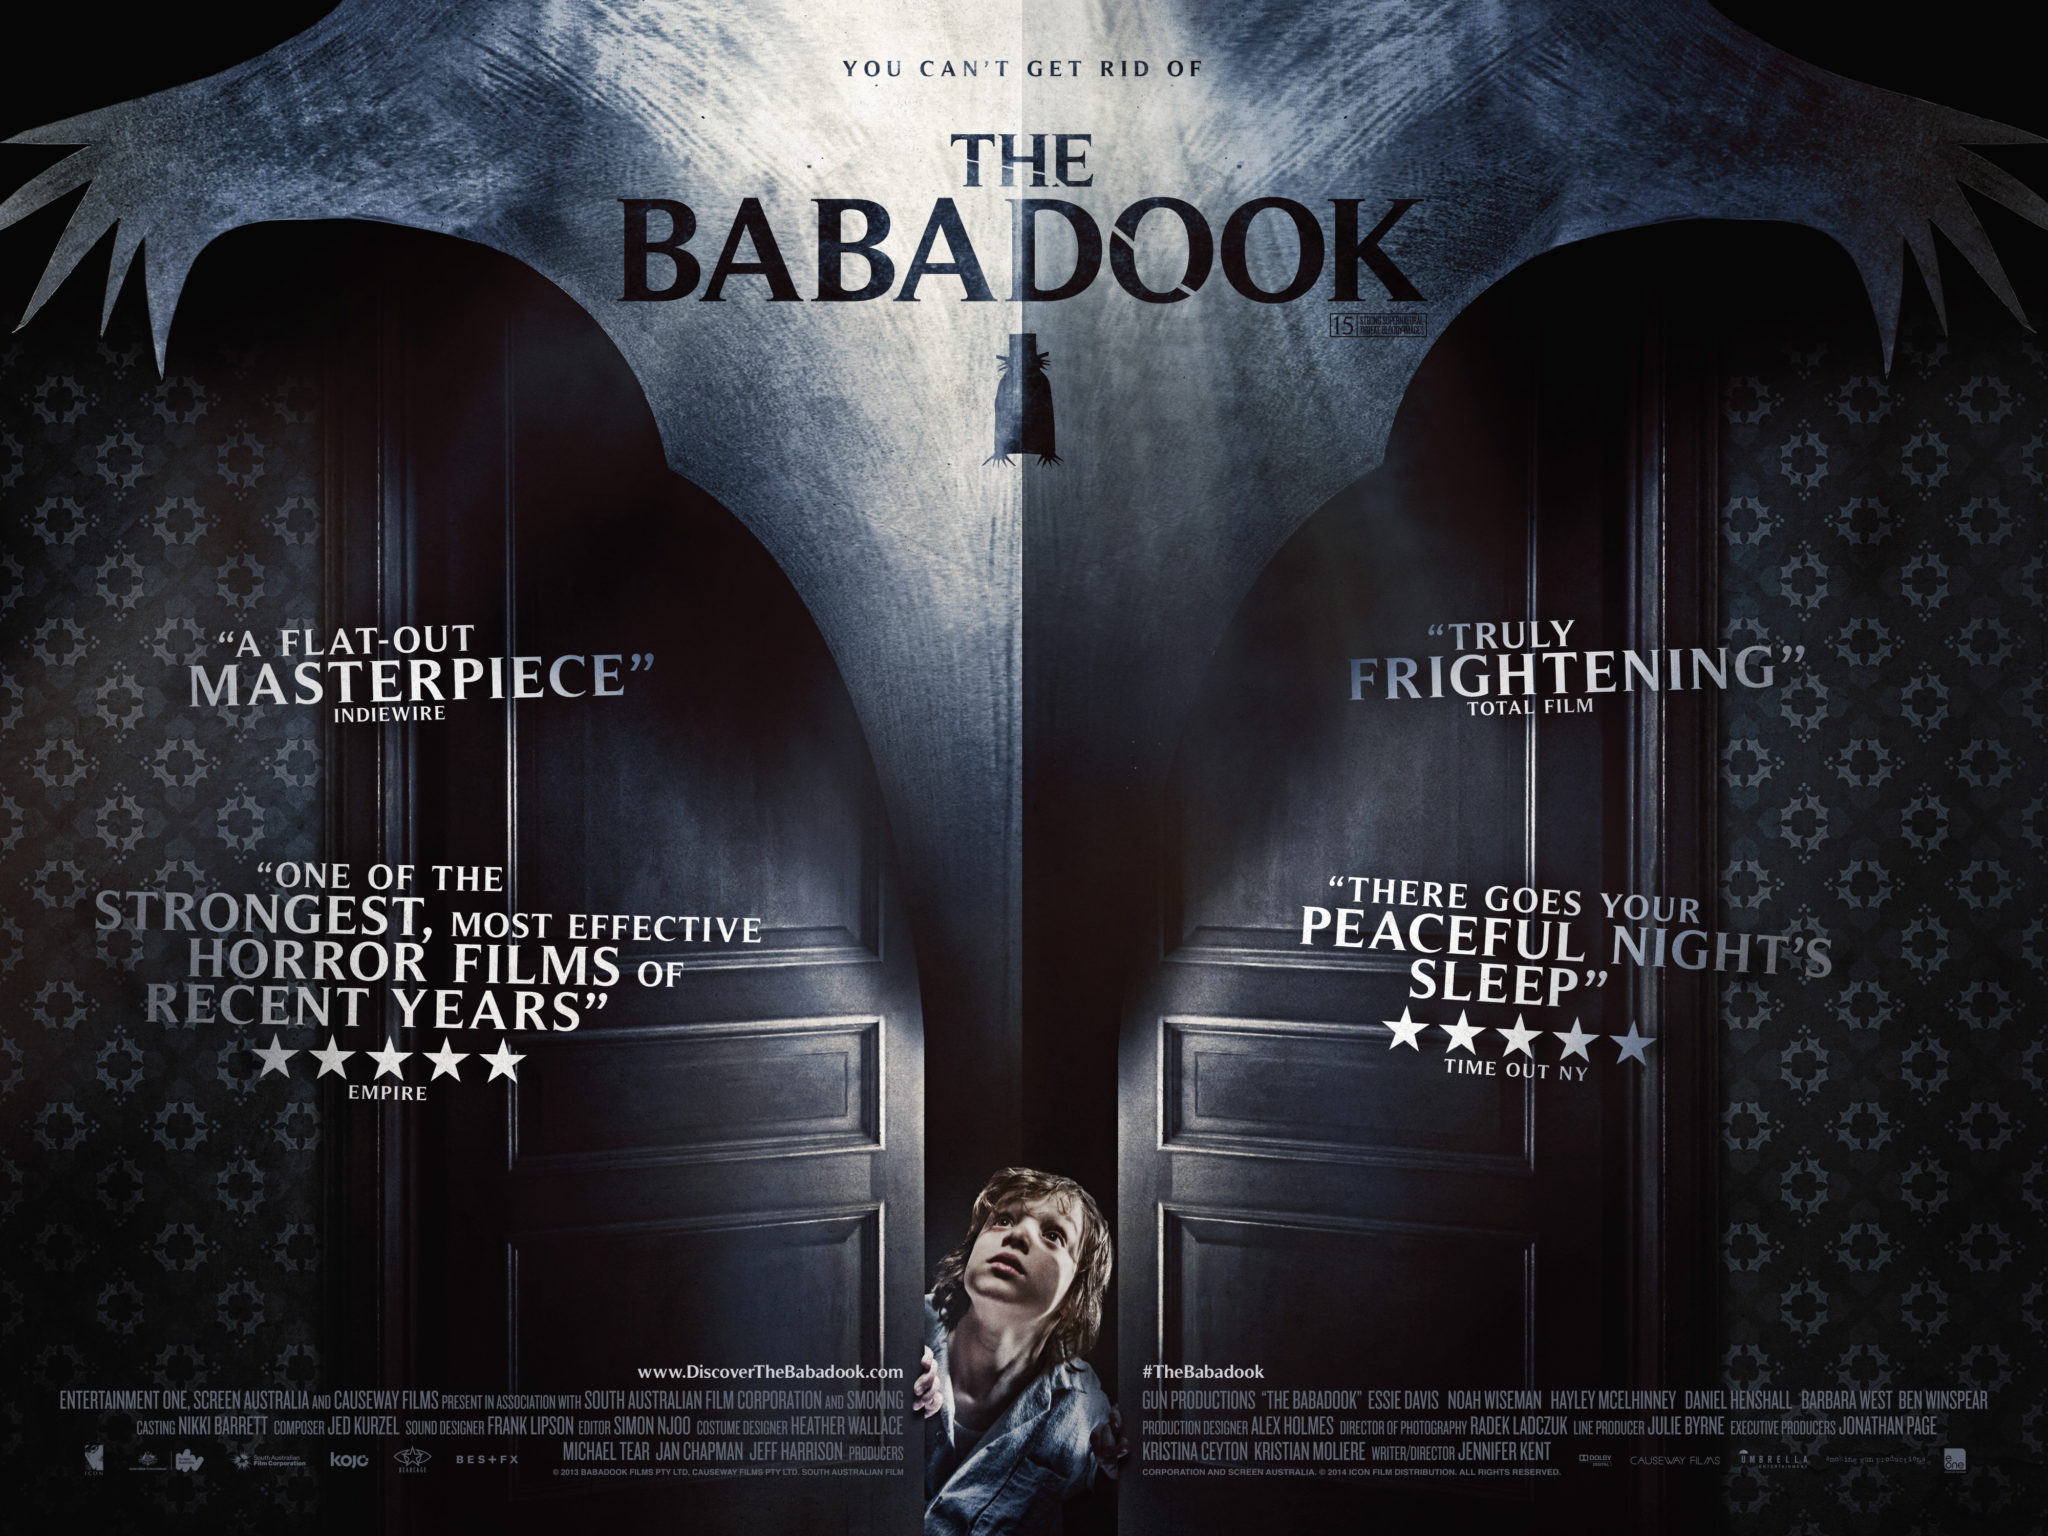 The Babadook Review: Smart and Uniquely Terrifying